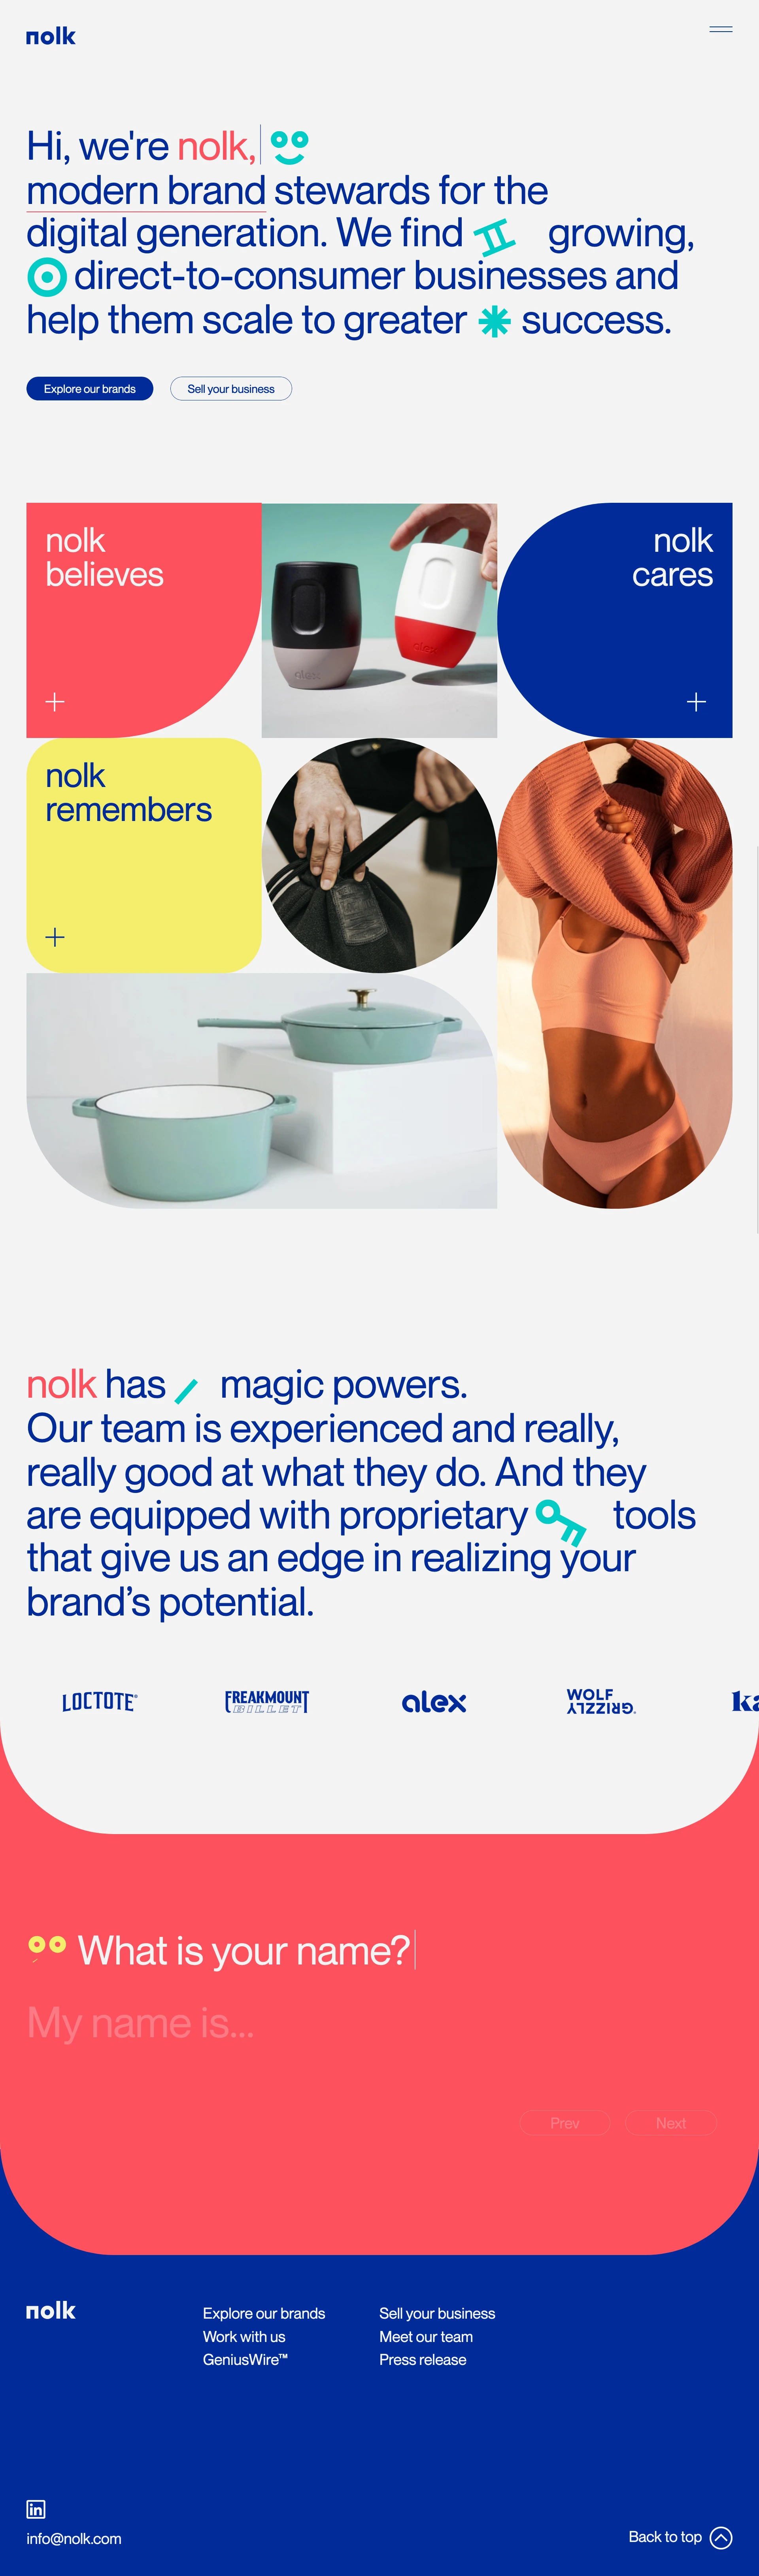 nolk Landing Page Example: Hi, we're nolk, a modern brand stewards for the digital generation. We find growing, direct-to-consumer businesses and help them scale to greater success.